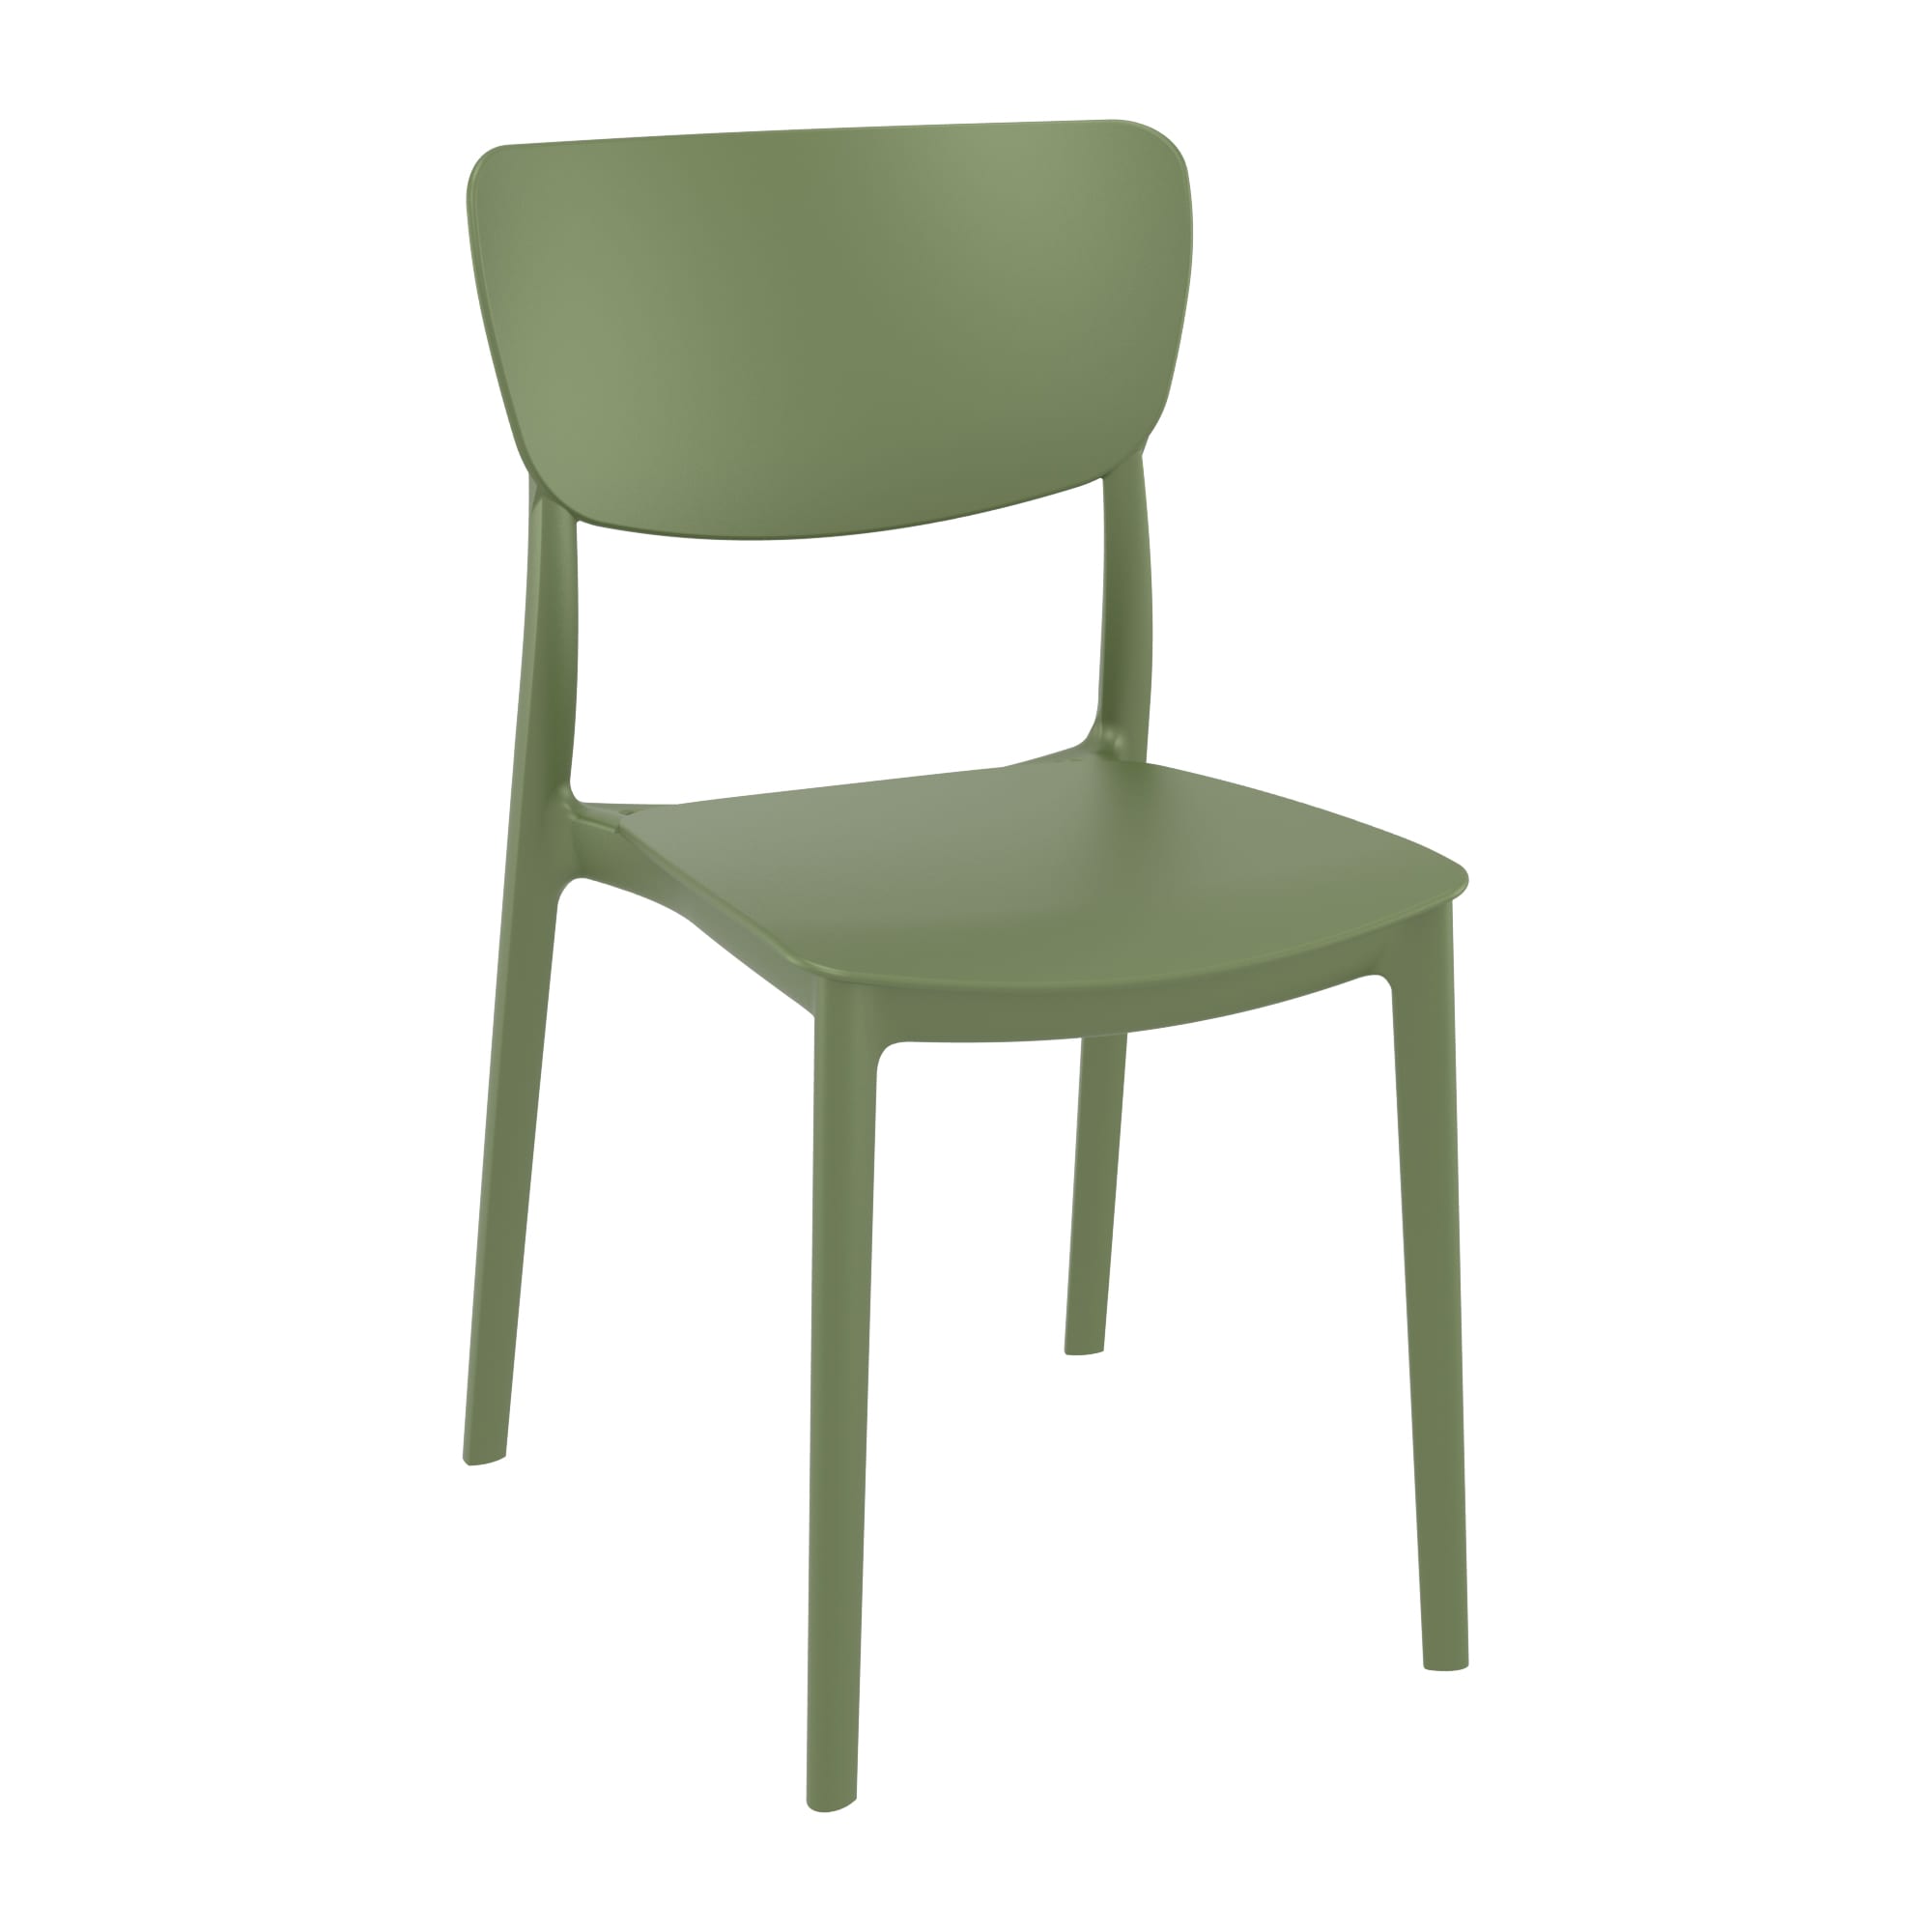 Manna Side Chair - Olive Green